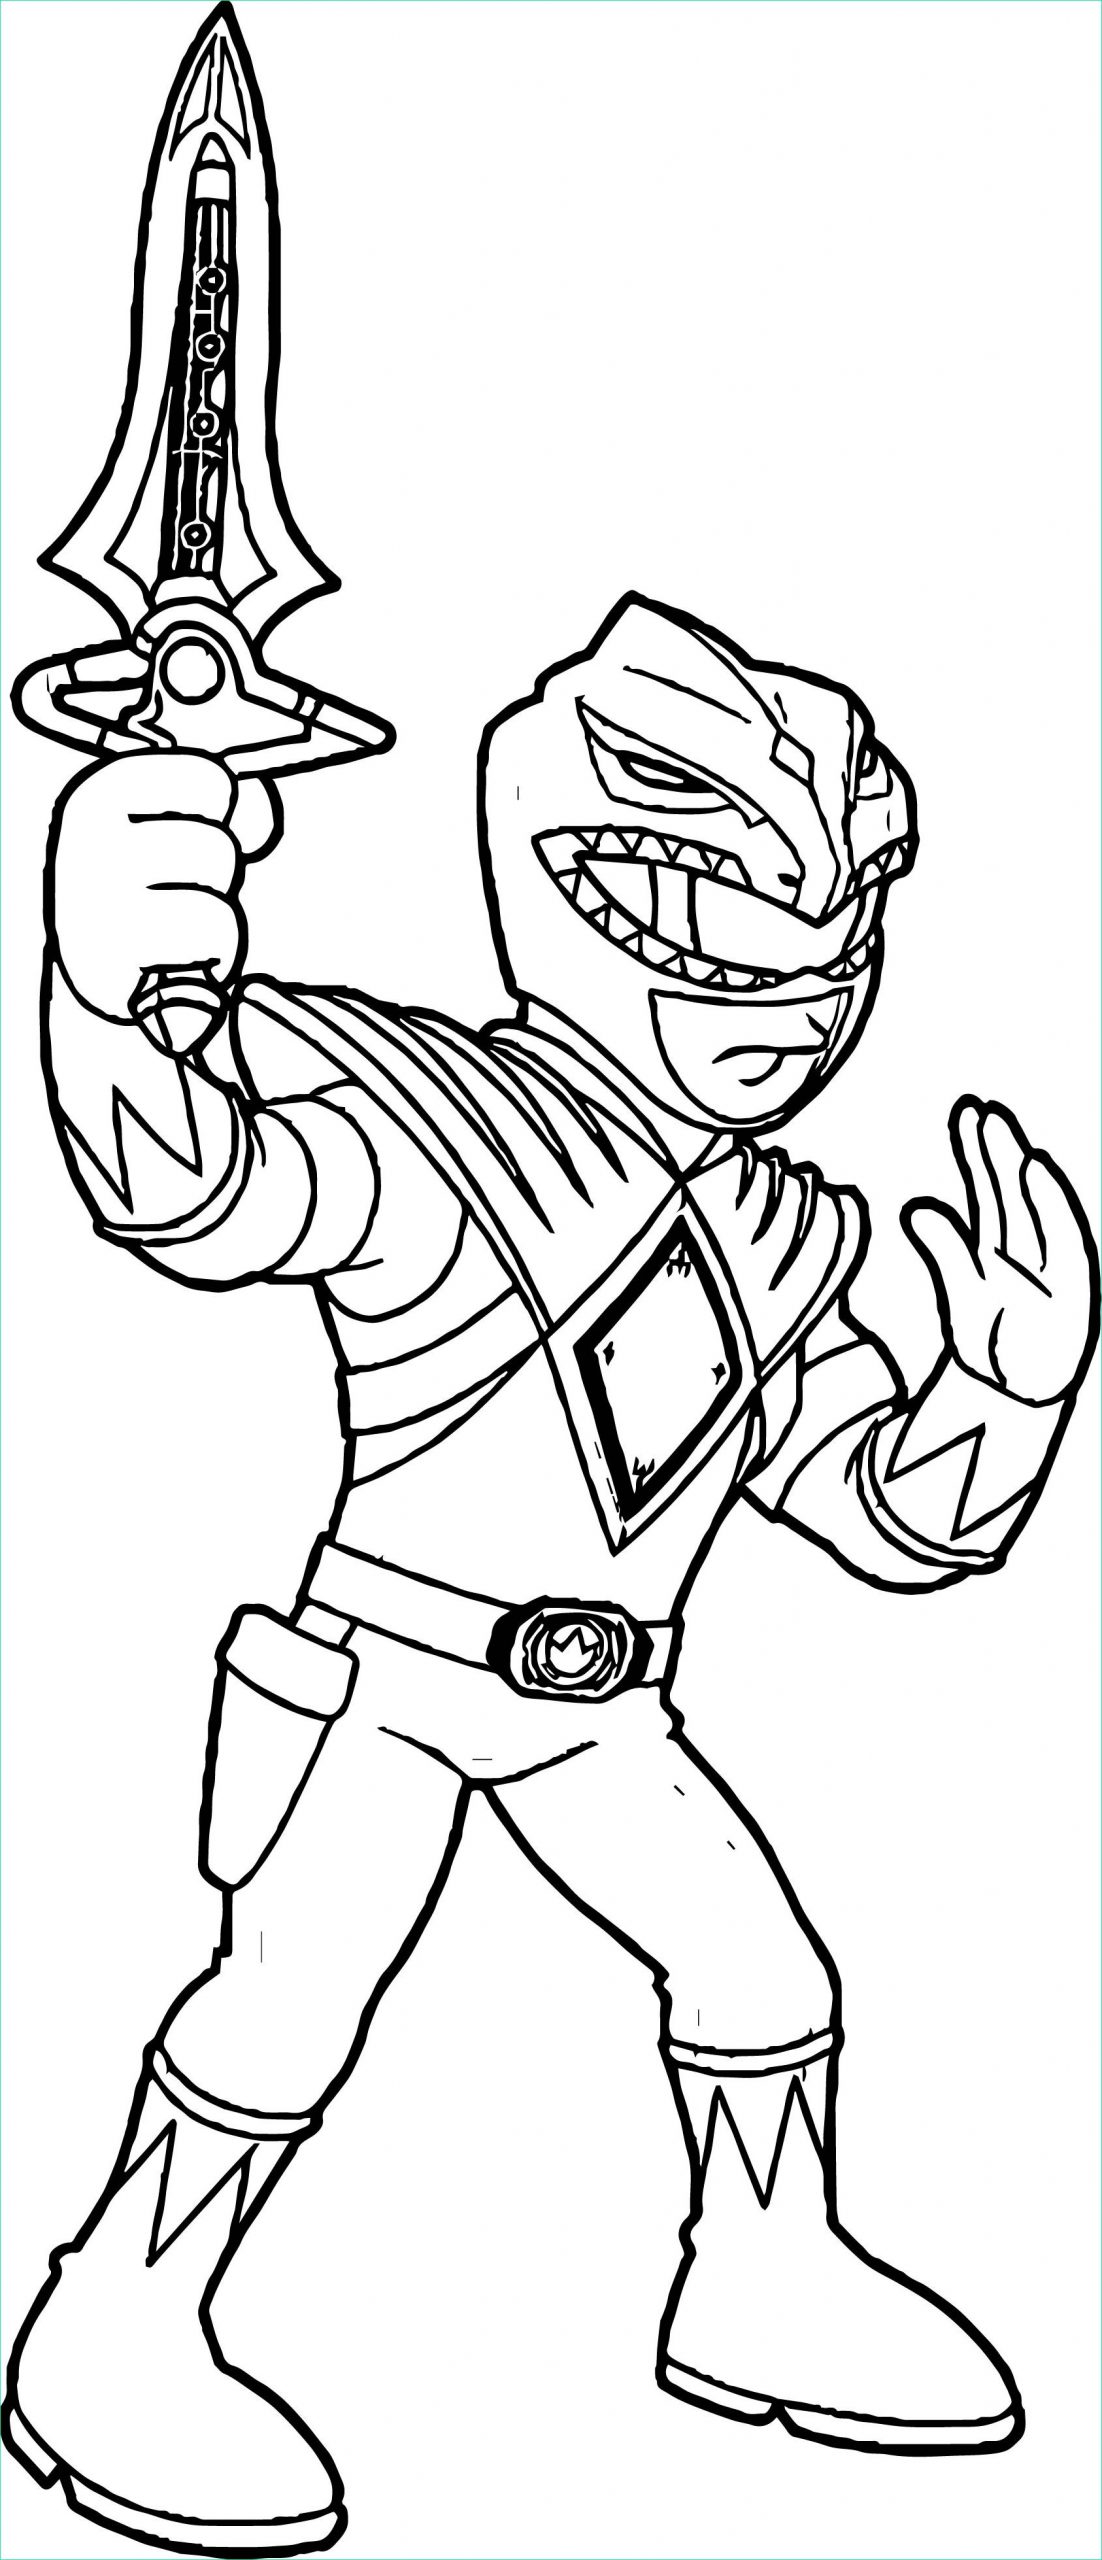 Coloriage Ninja Steel Cool Stock the Best Free Imprimer Coloring Page Images Download From